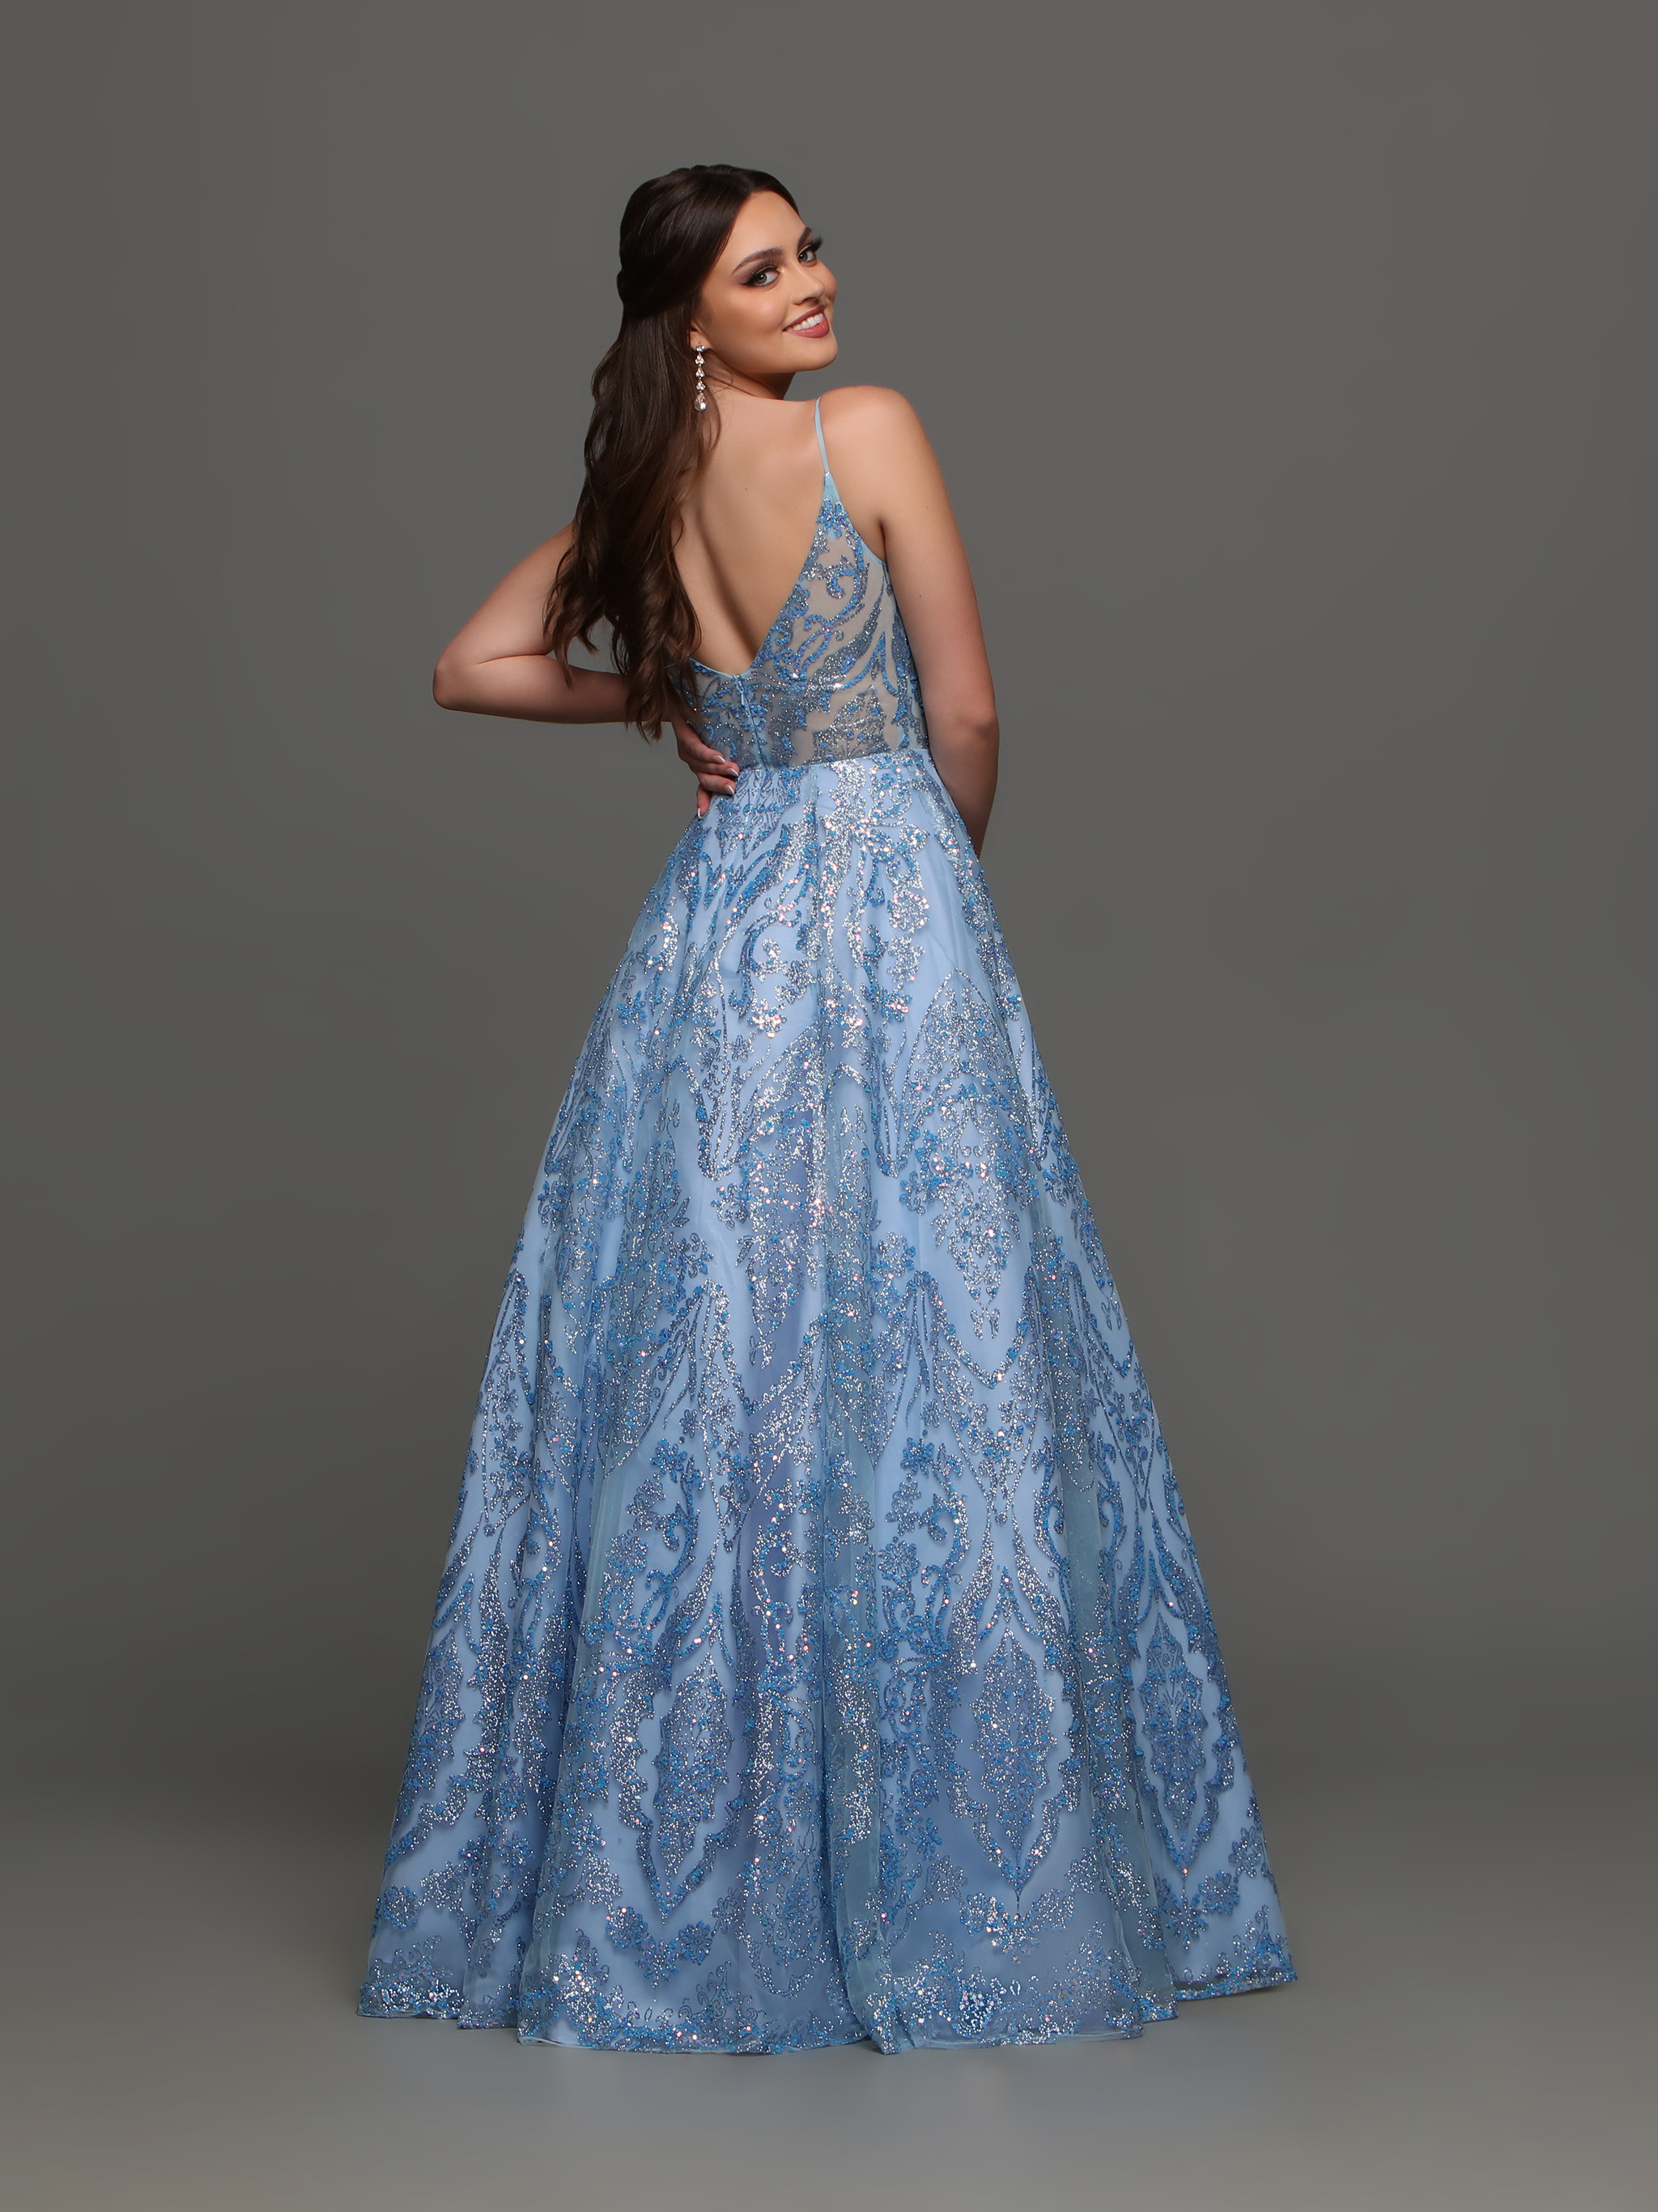 Image showing back view of style #72384